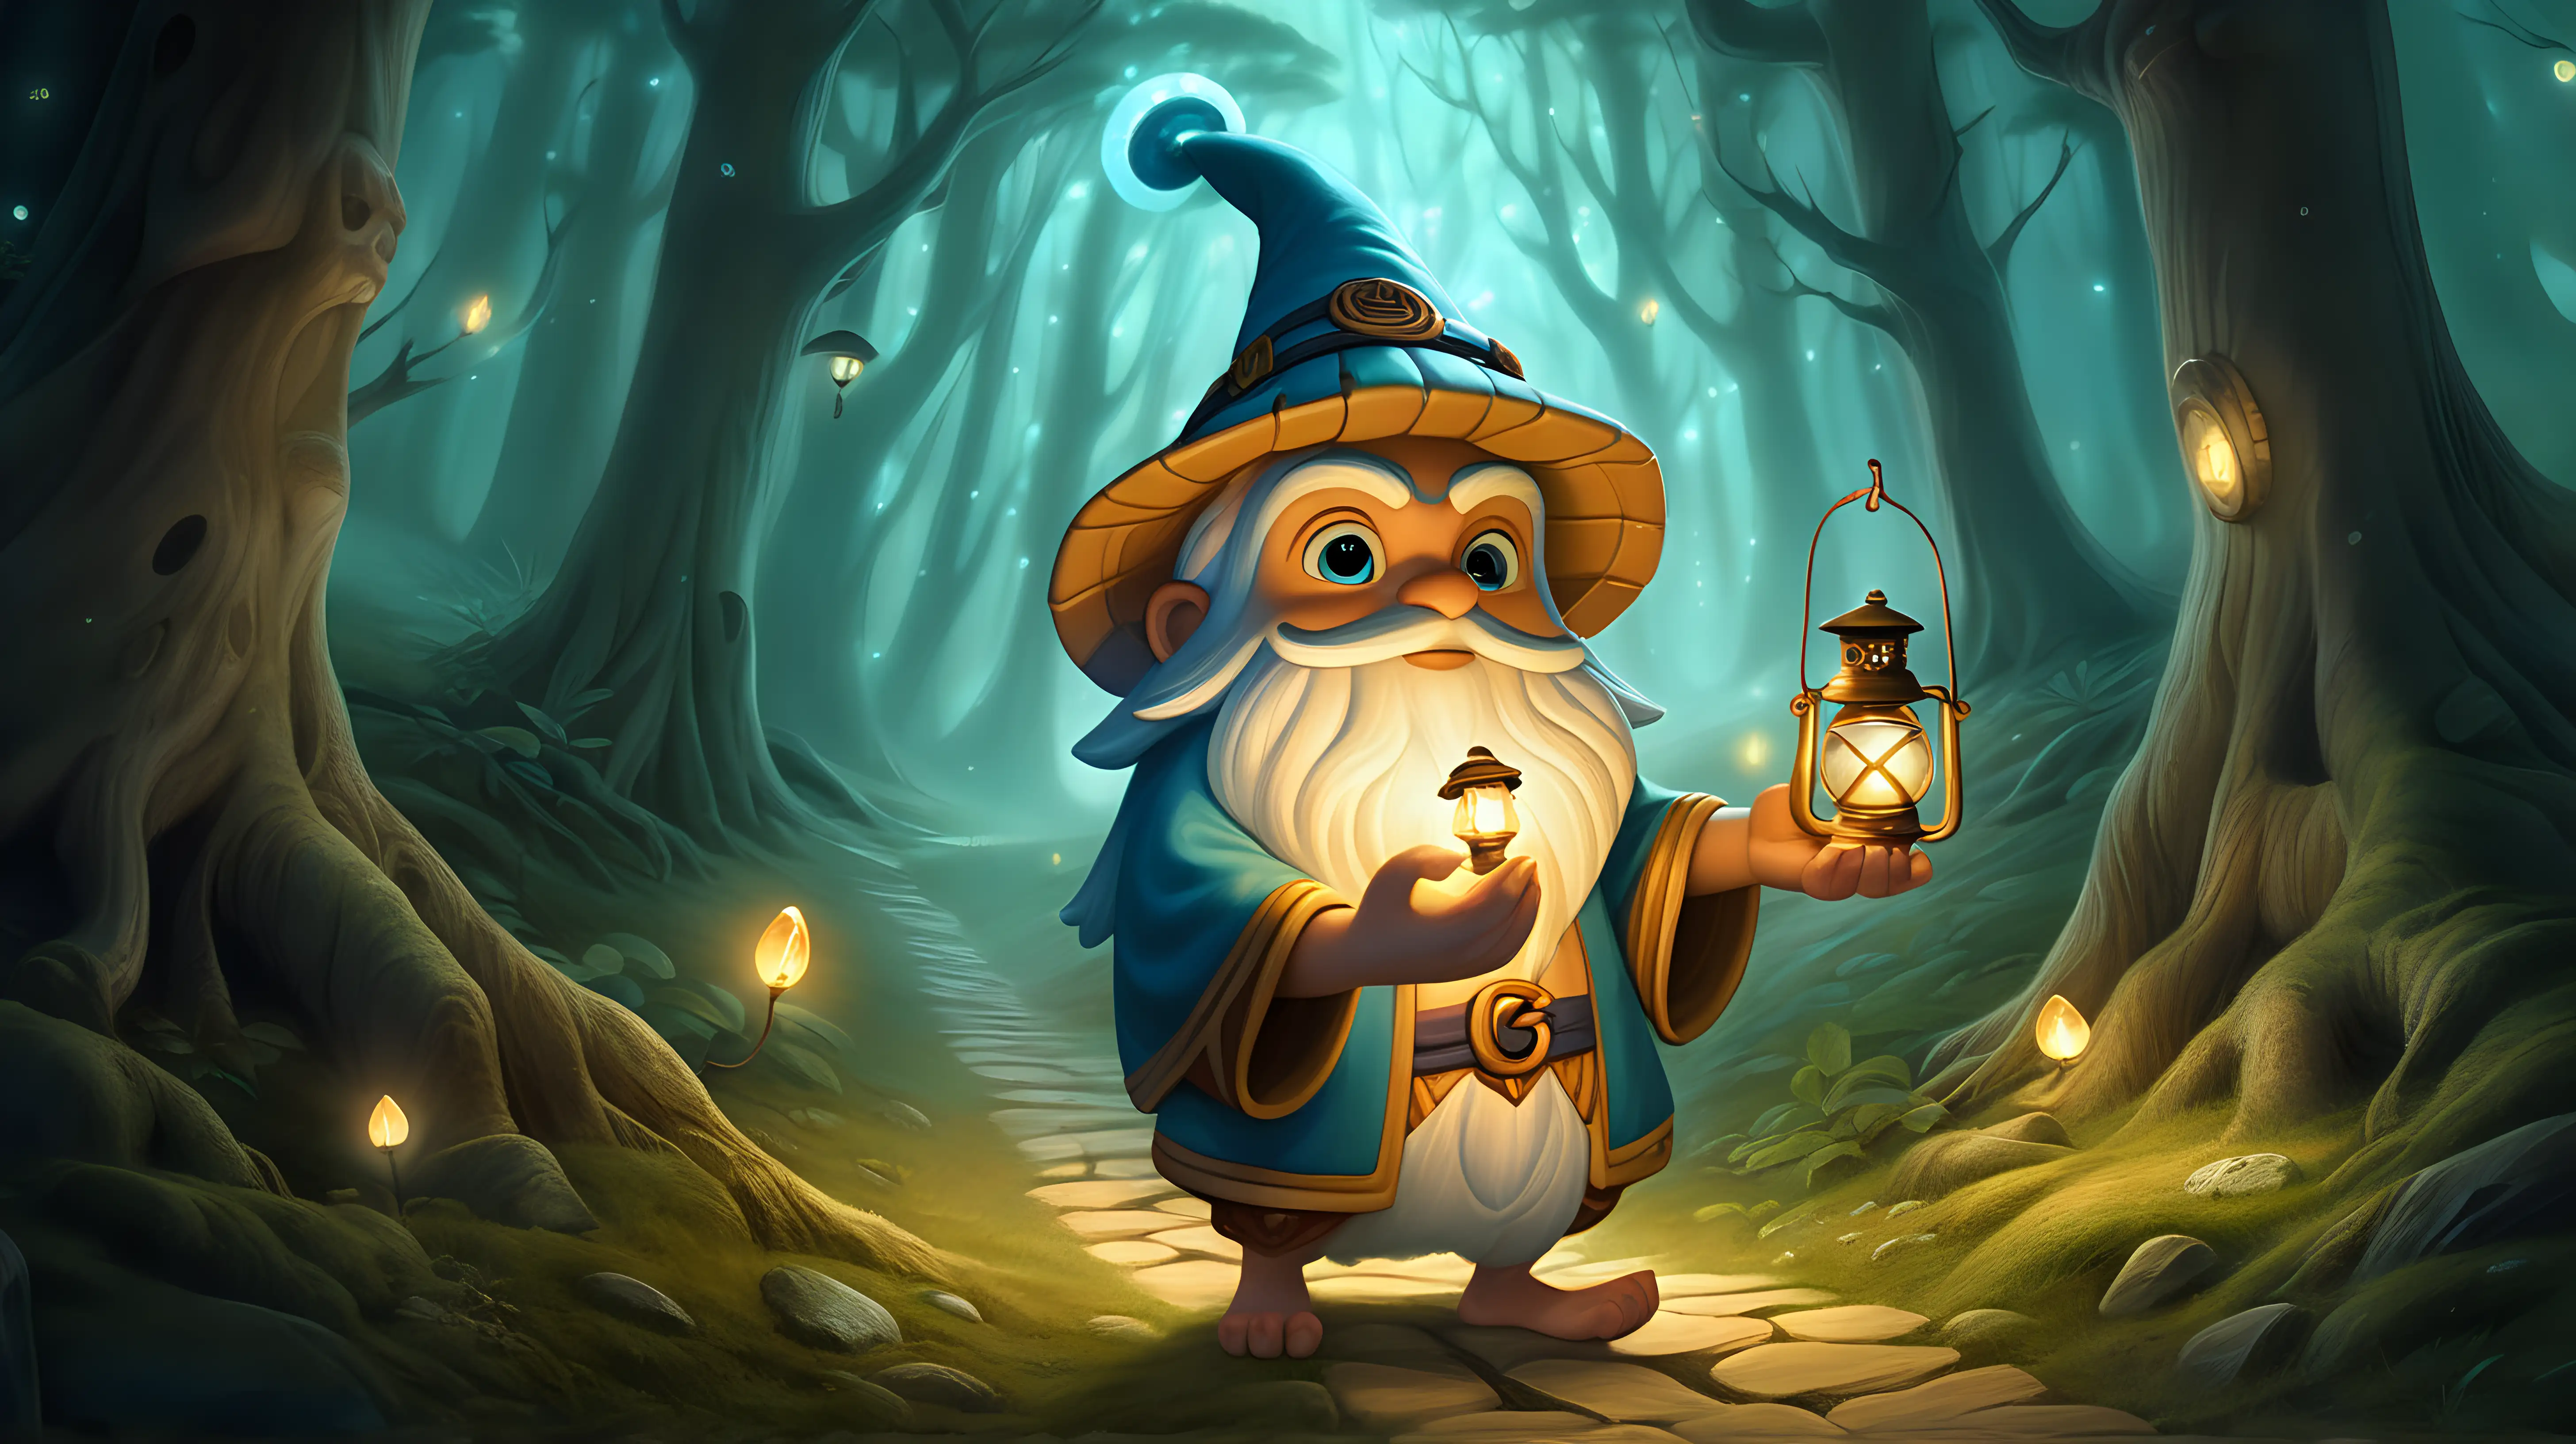 A wise, yet playful character holding a tiny lantern, its glow illuminating a path through a mystical forest.